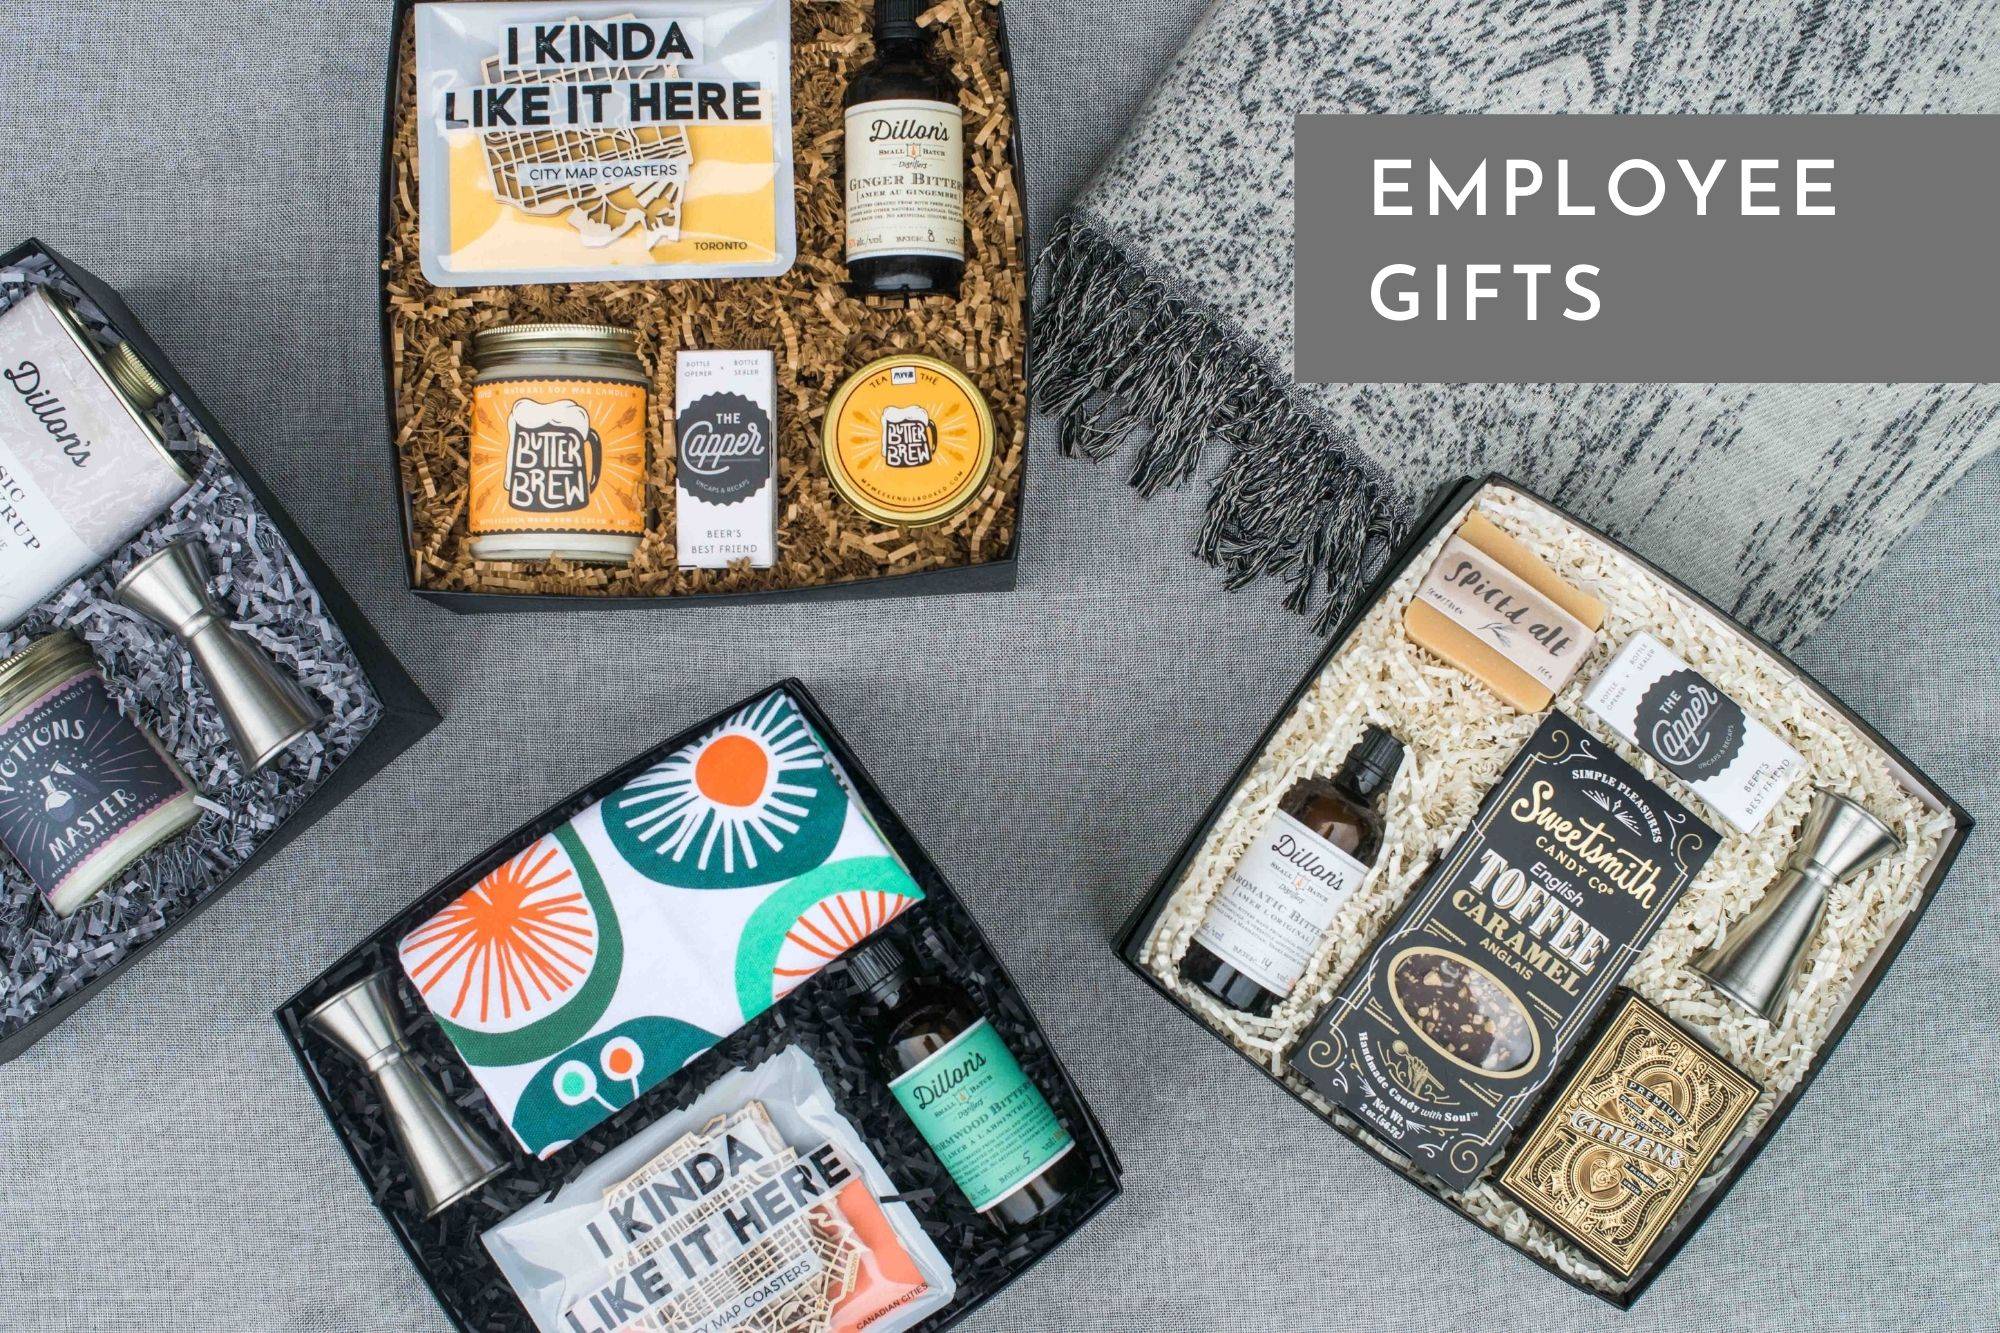 Employee Gifts – My Weekend is Booked